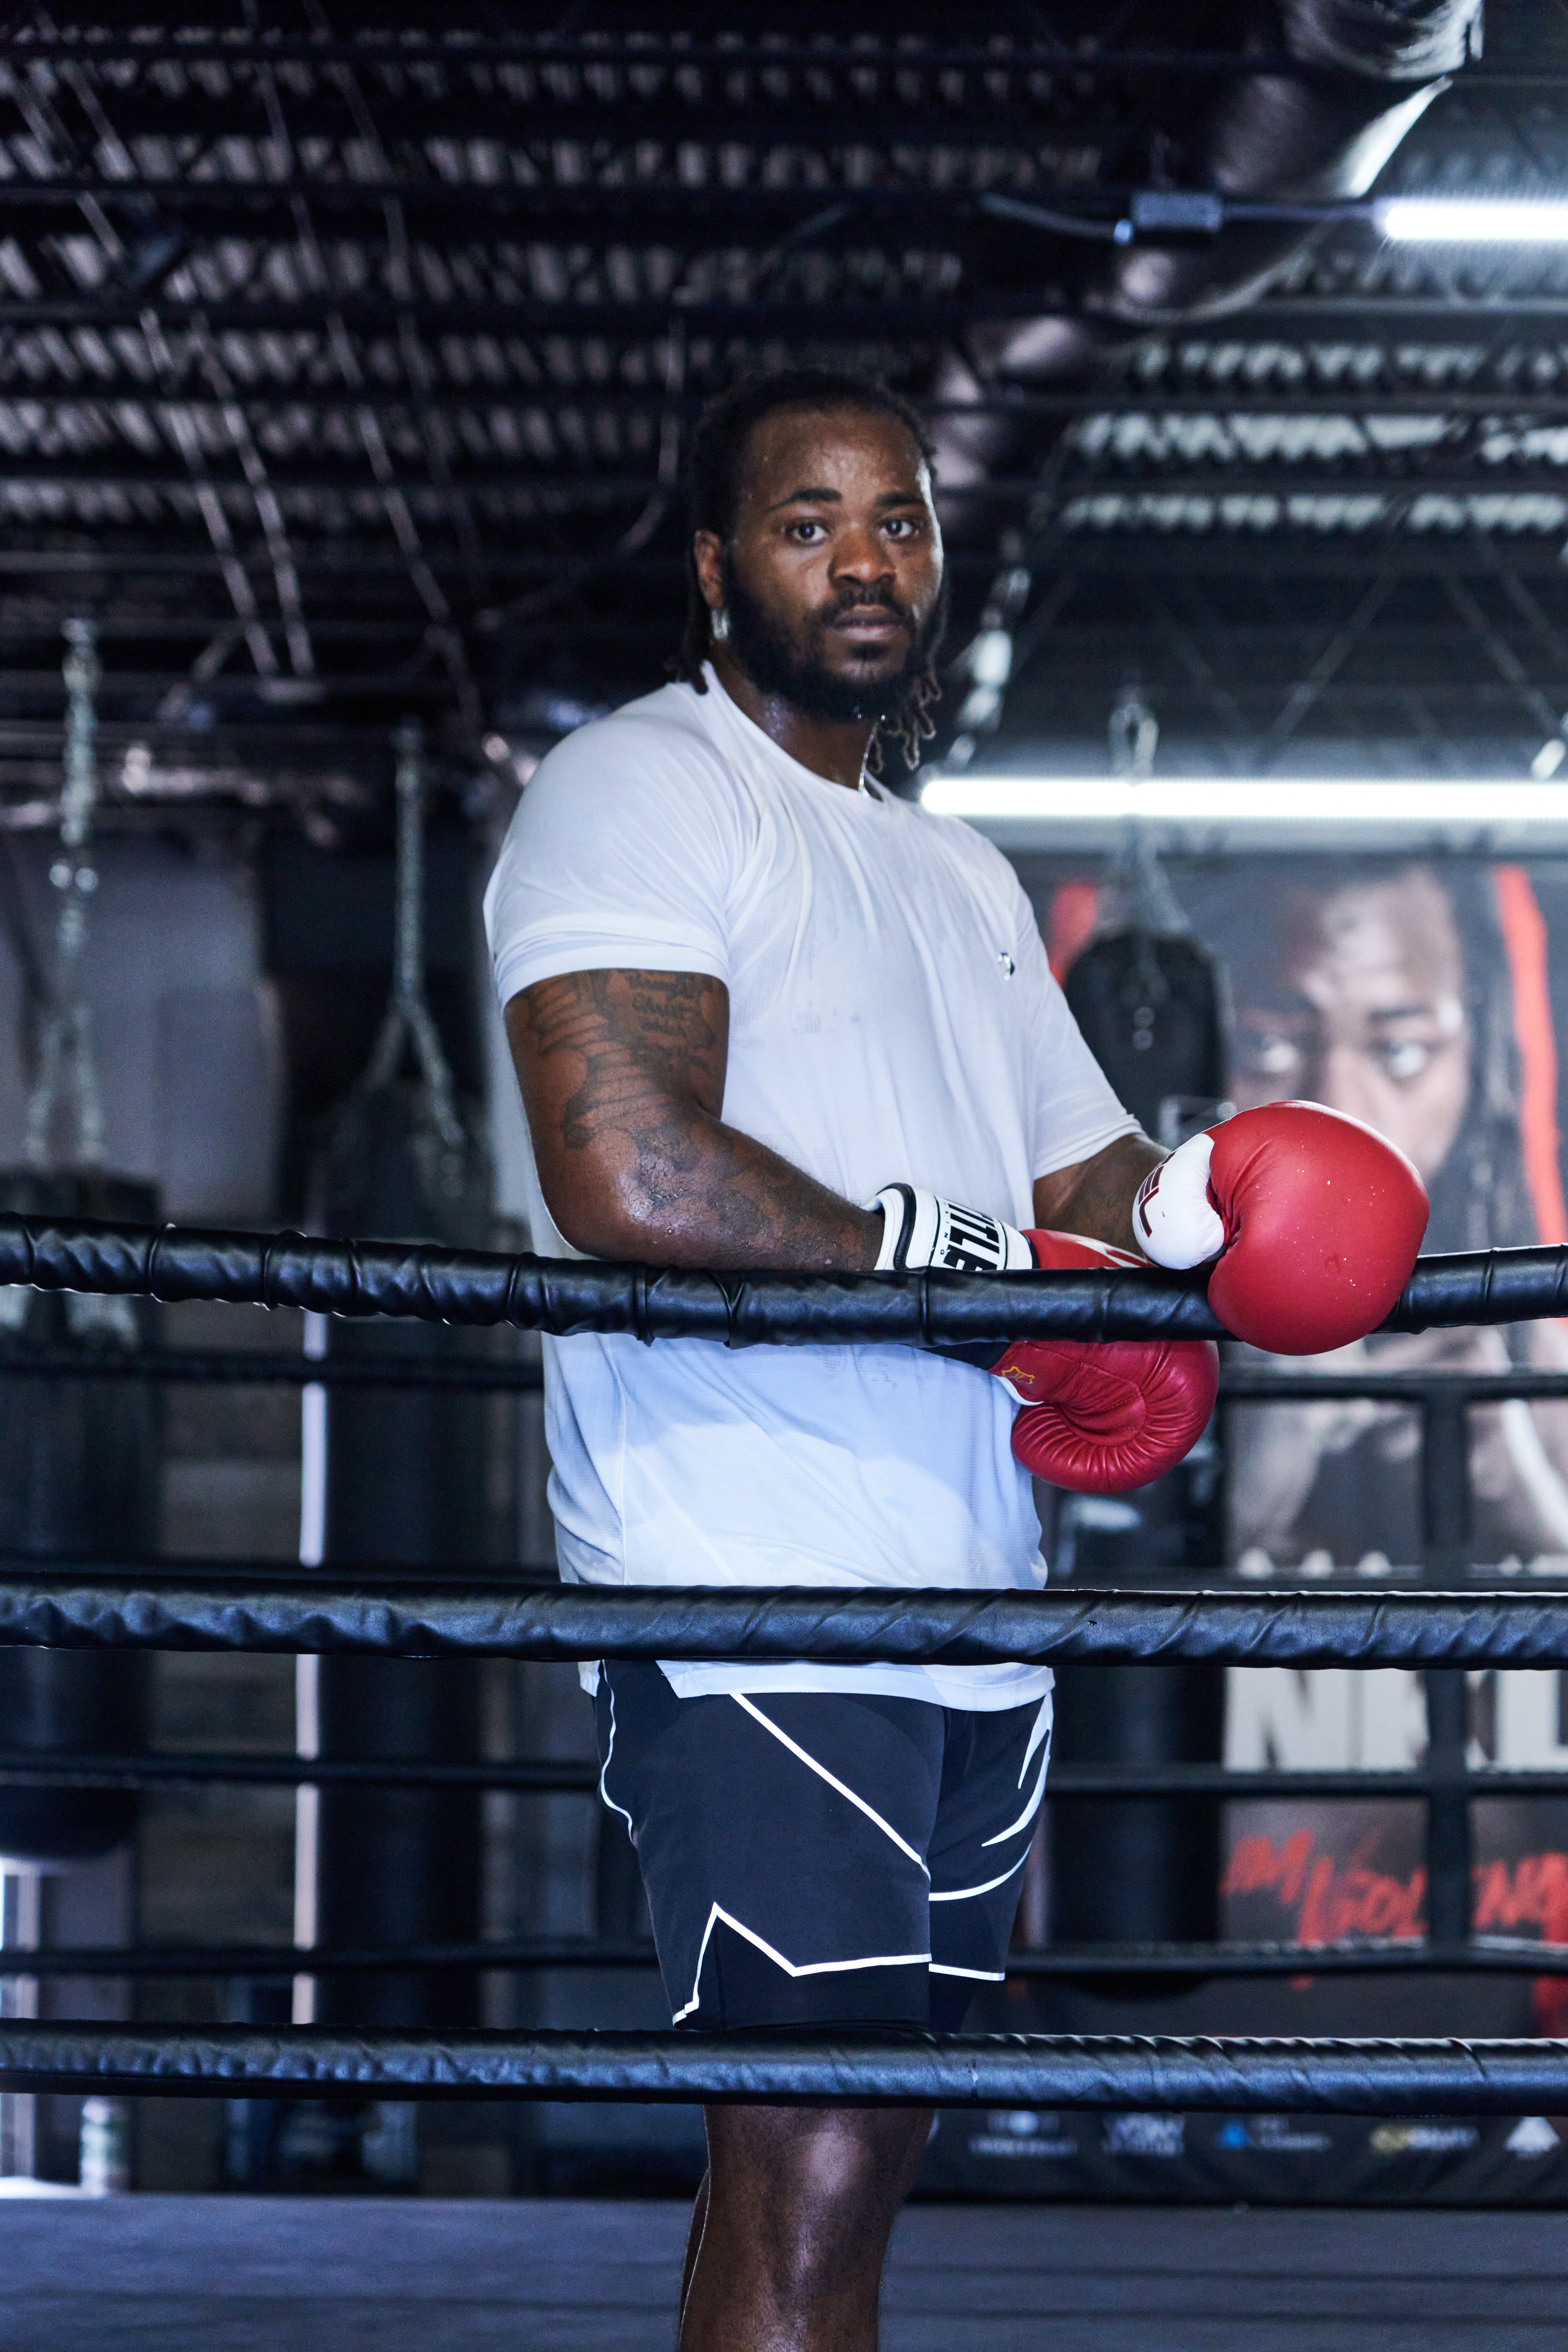 *** Shot for The US Sun ***, EXCLUSIVE (pics and video):  Professional boxer Jermaine Franklin is pictured at Square Off Gym in Miramar, Florida on March 16, 2023., Photo: Romain Maurice for The US Sun, OK TO REUSE, OK TO SYNDICATE, NO RESTRICTIONS,